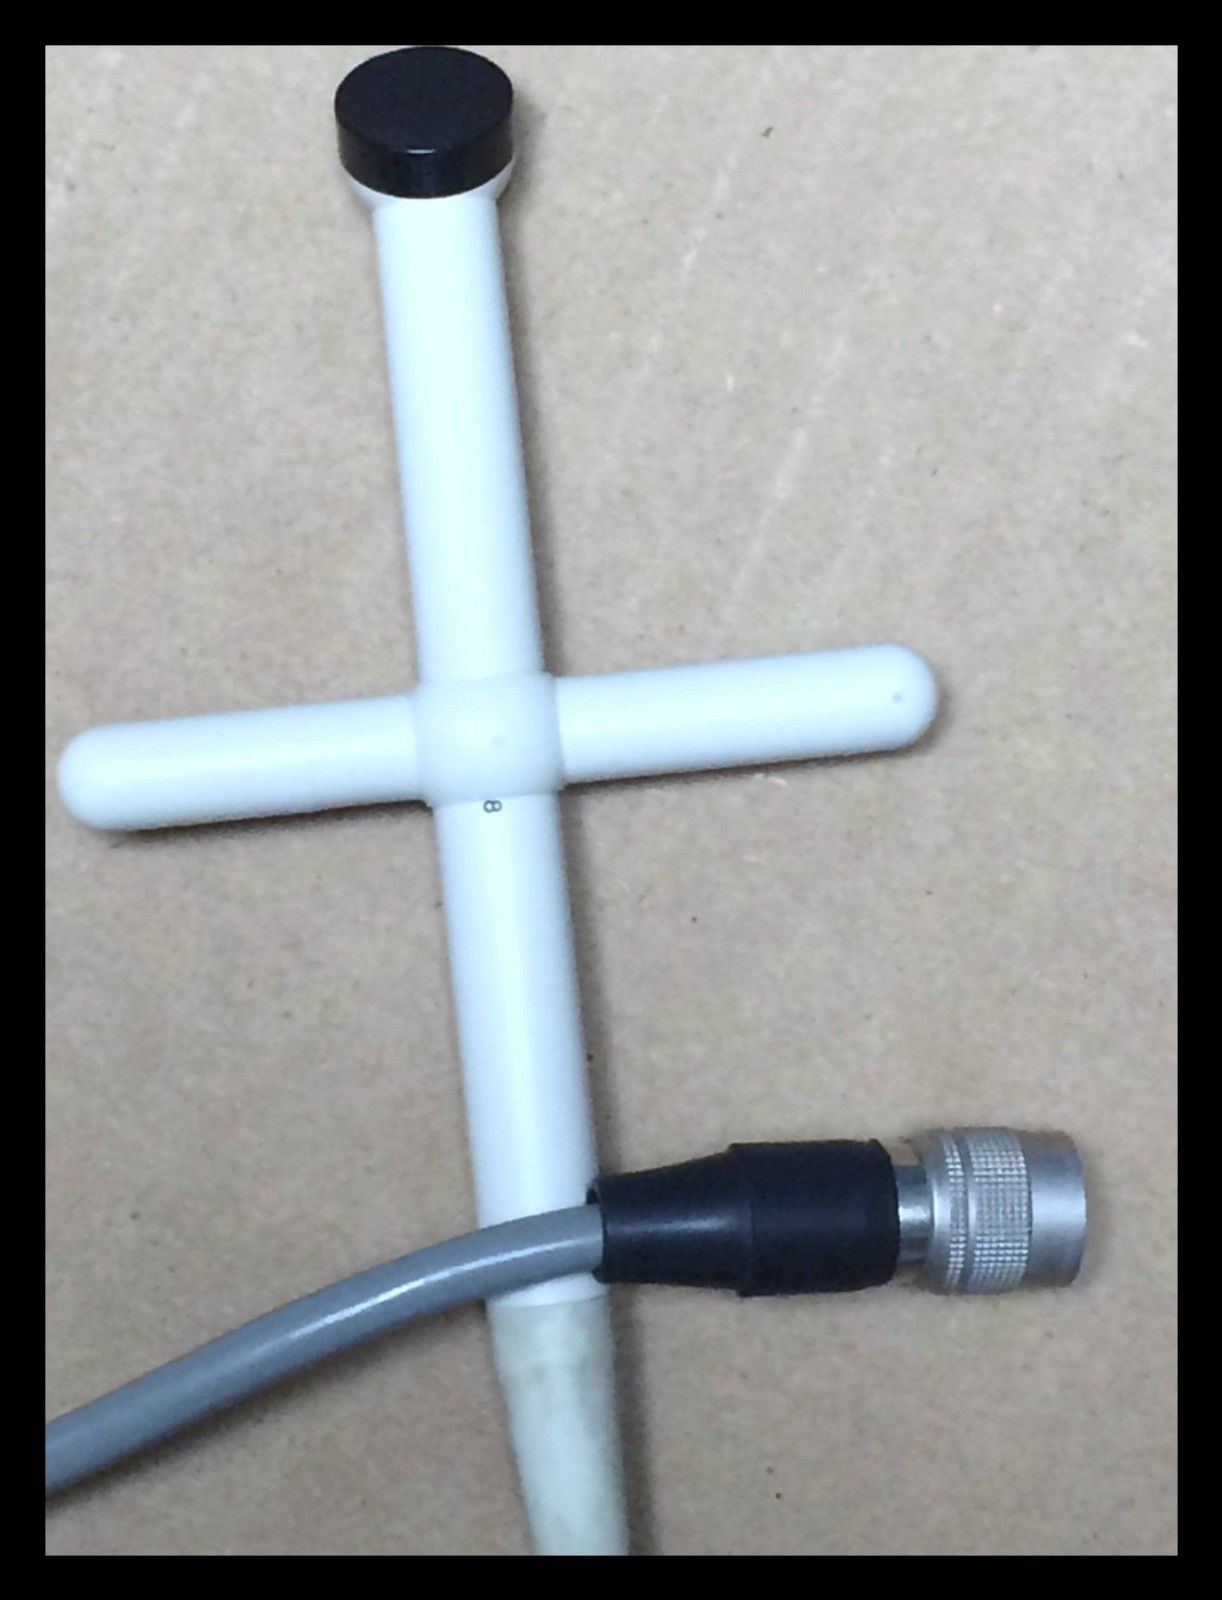 a white pipe connected to a black and white hose